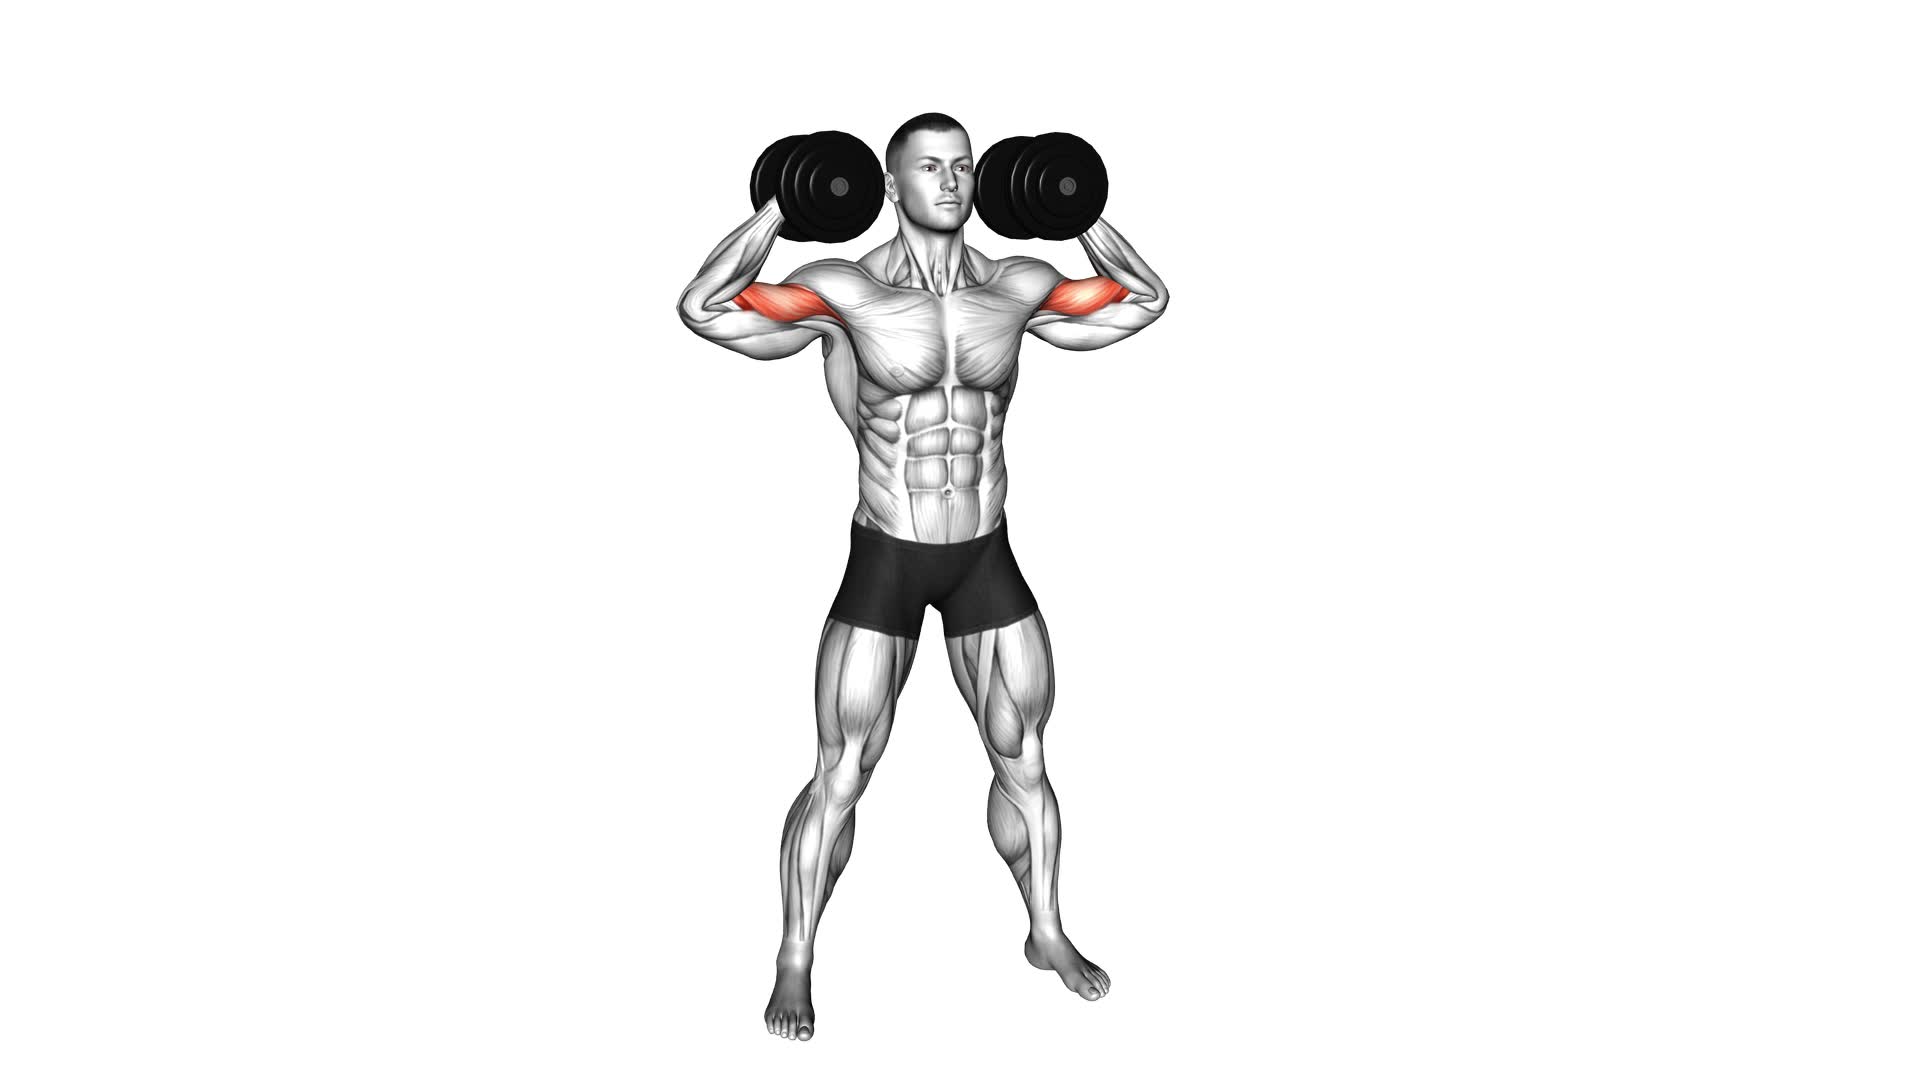 Dumbbell High Curl - Video Exercise Guide & Tips